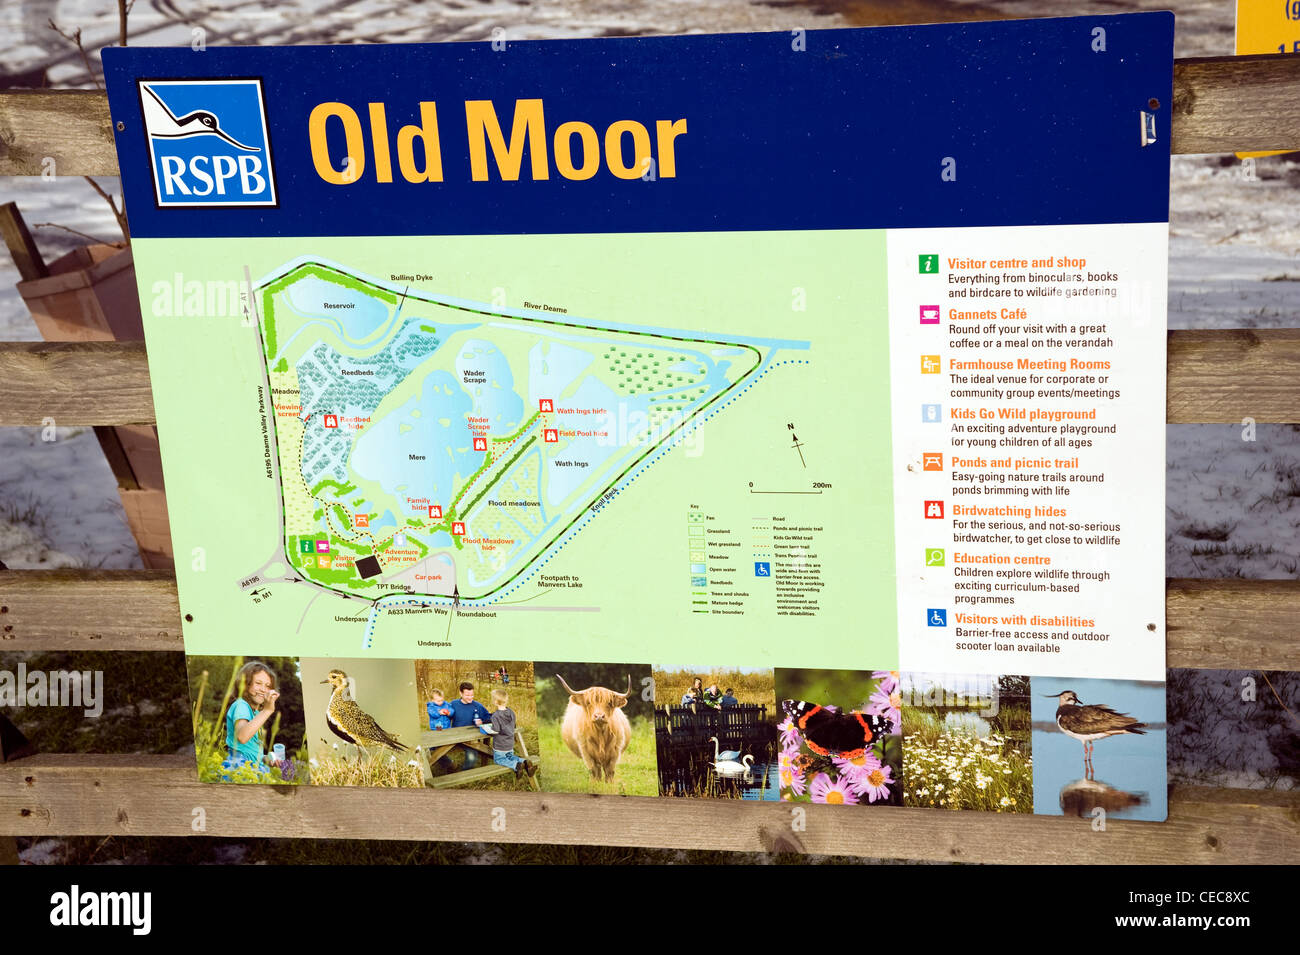 RSPB, Old Moor Nature reserve, Dearne Valley, Rotherham. February 2012 Stock Photo